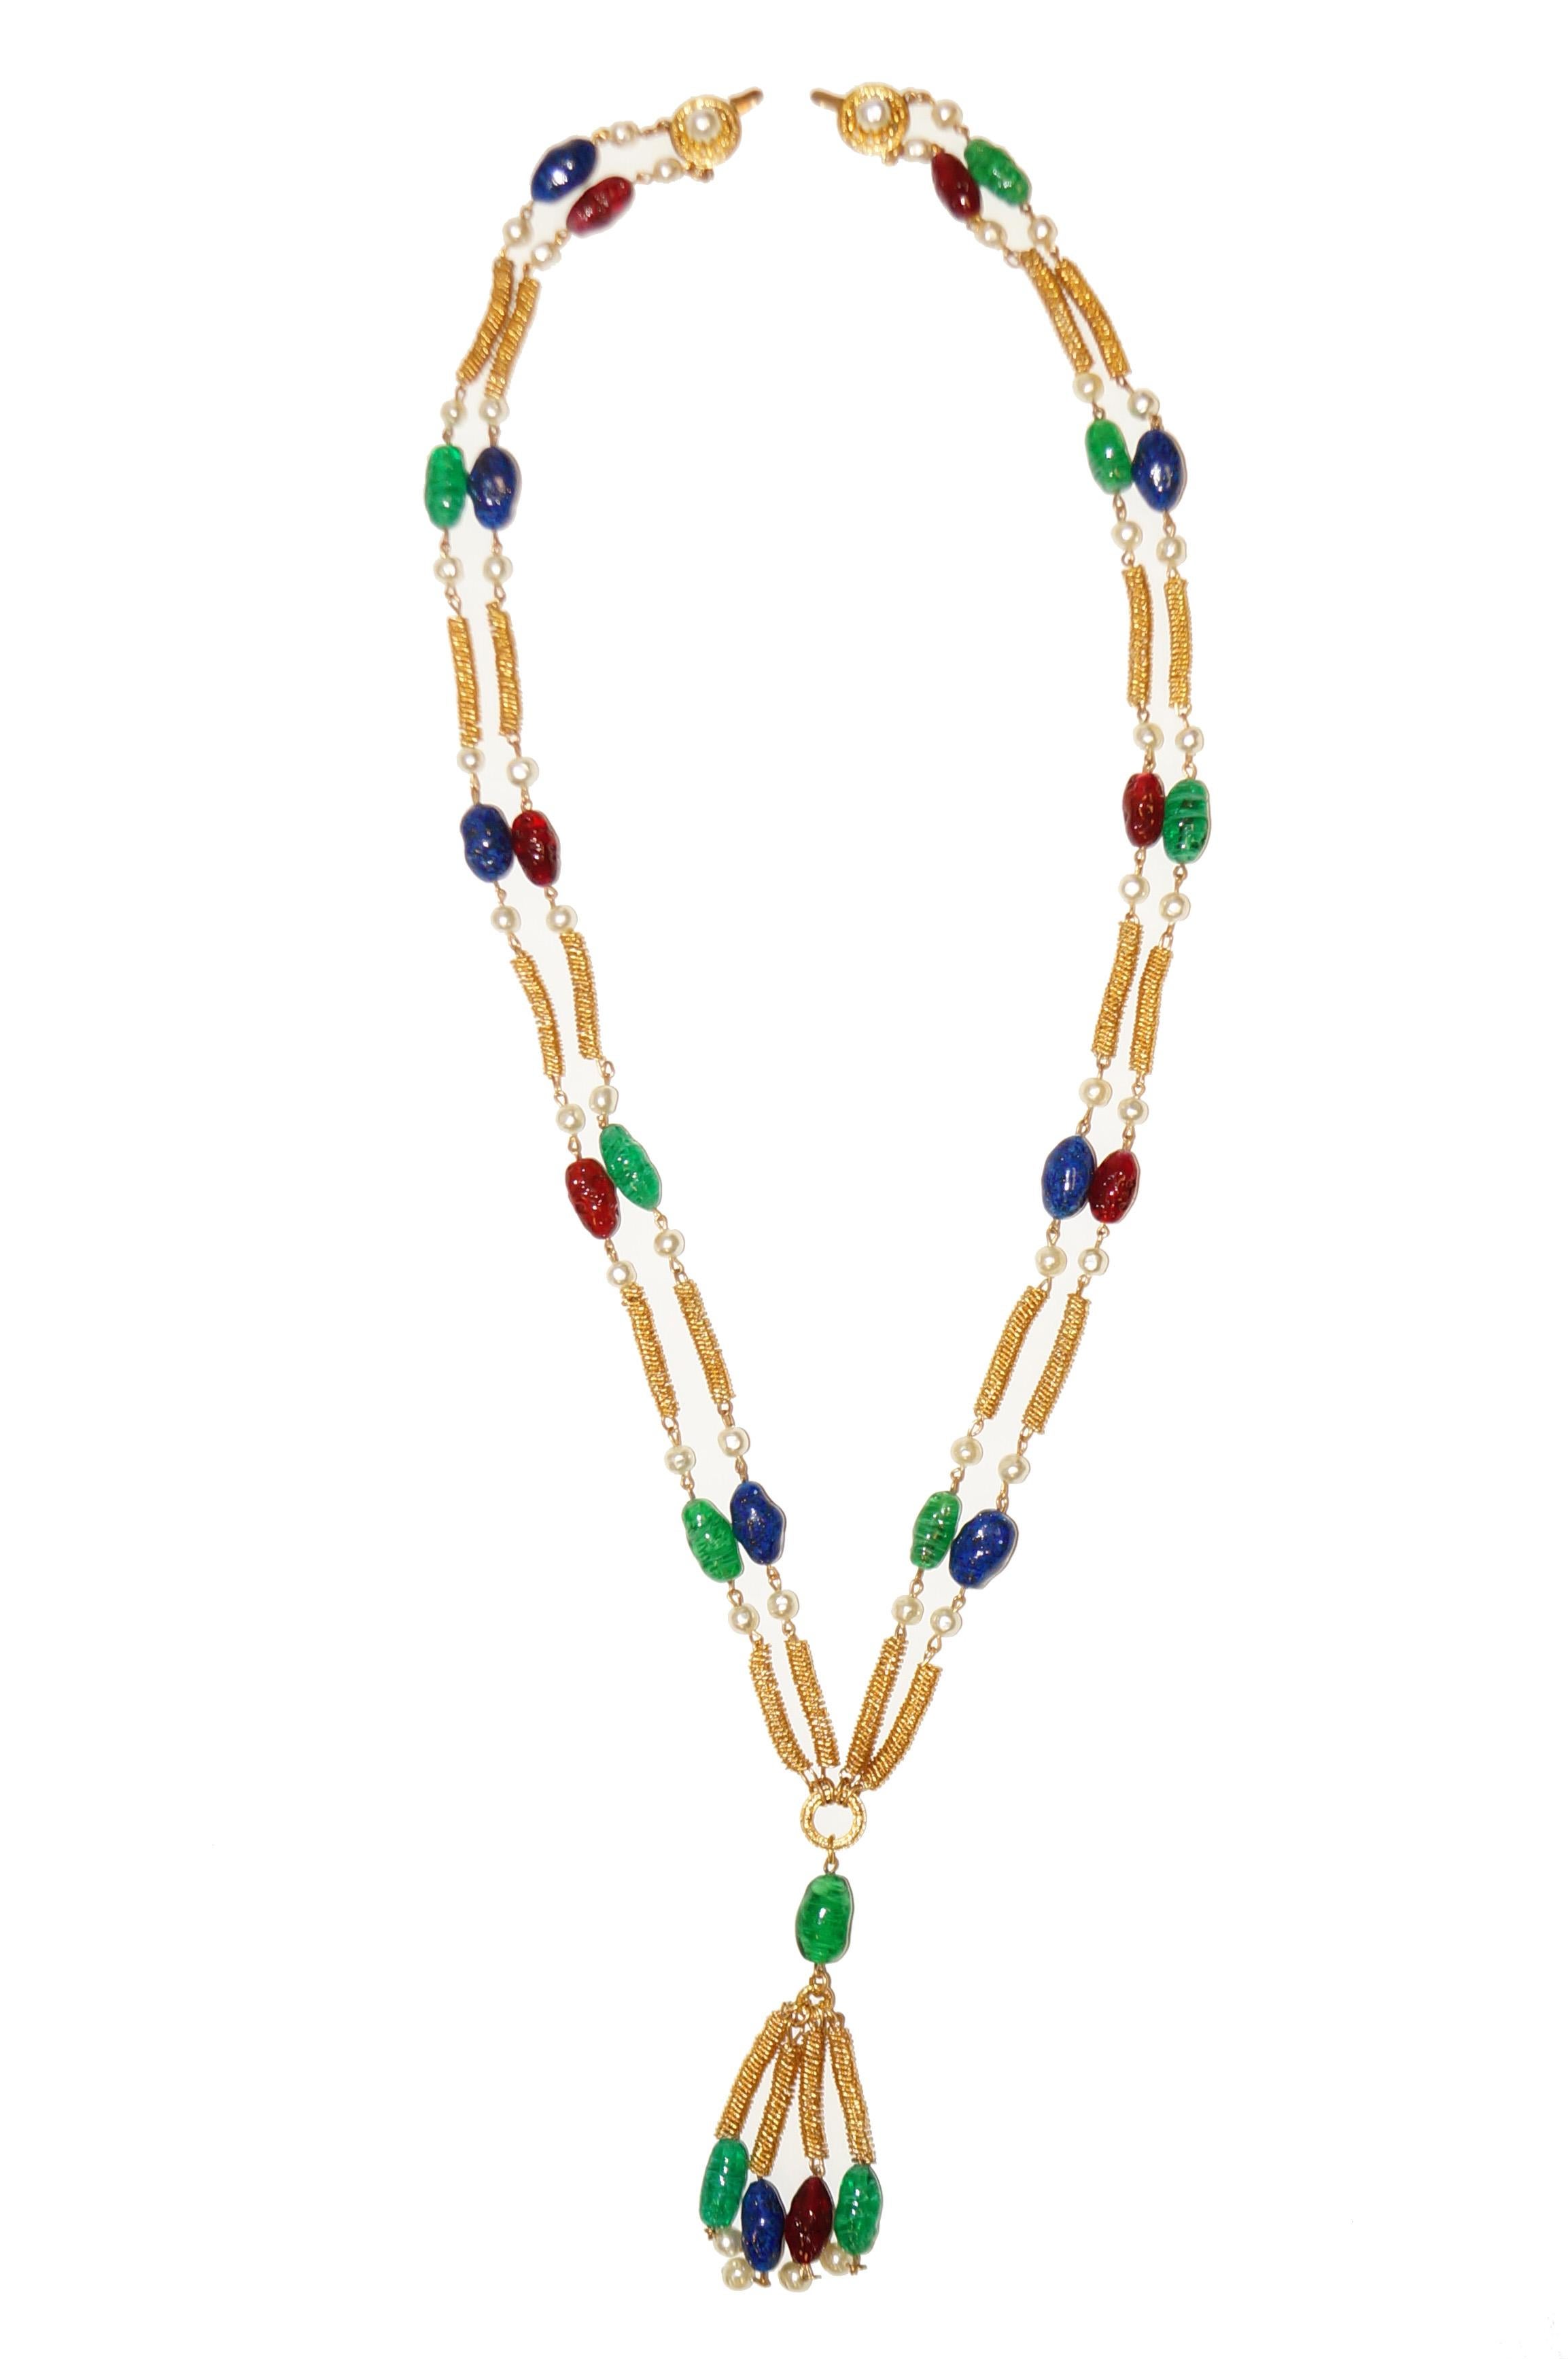  1960’s Chanel Gripoix Four Strand Necklace with Tassel Drop 1